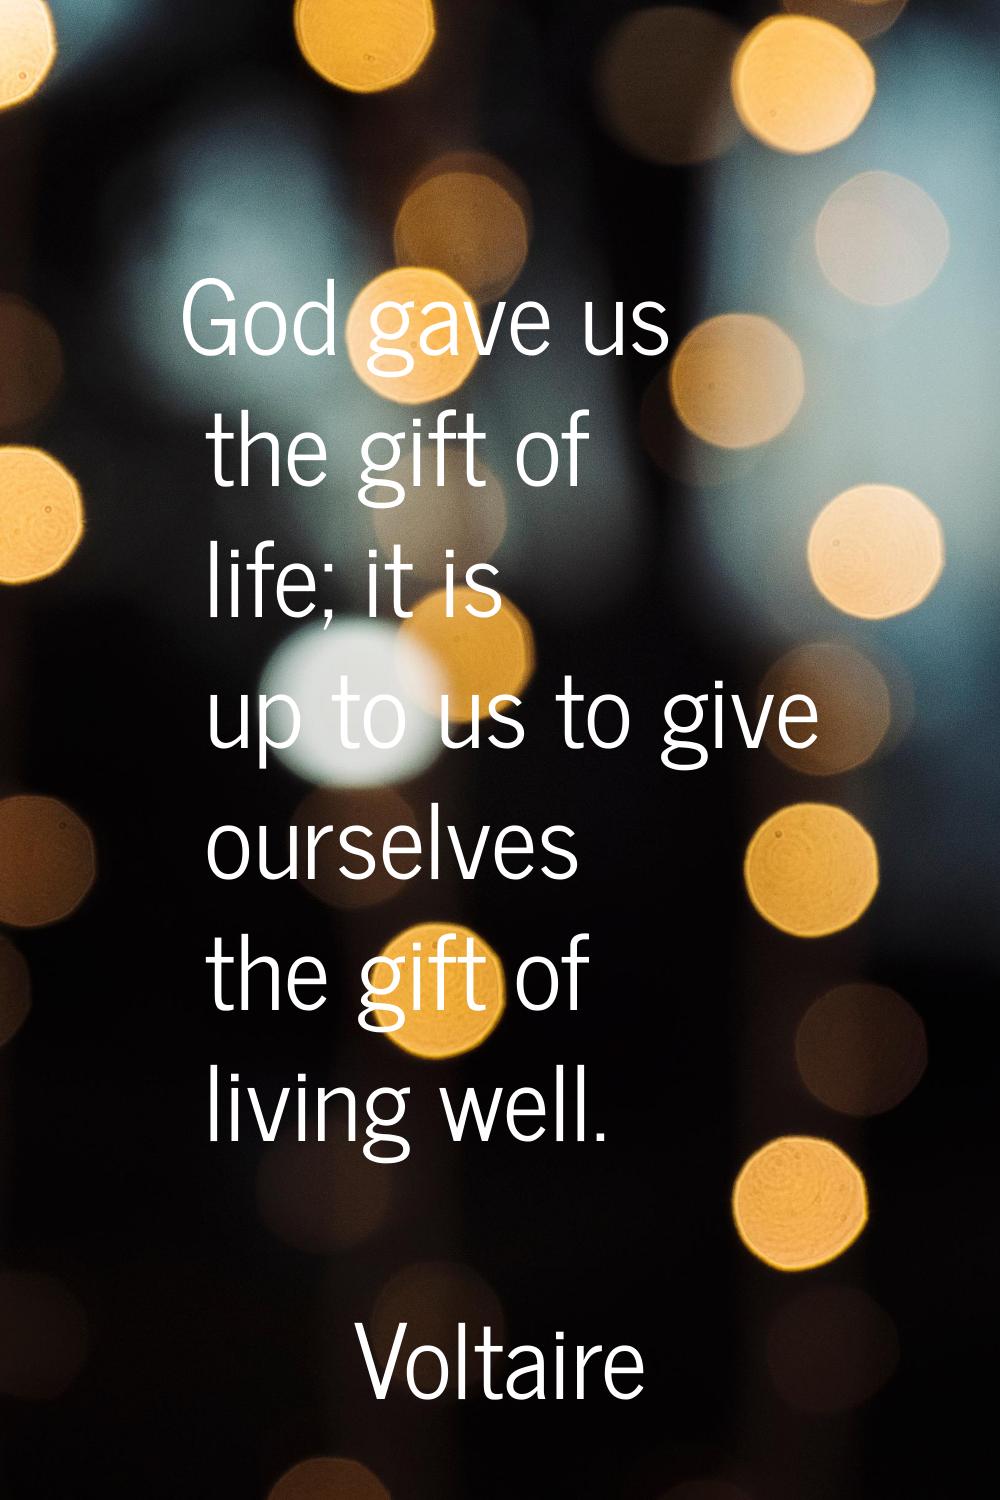 God gave us the gift of life; it is up to us to give ourselves the gift of living well.